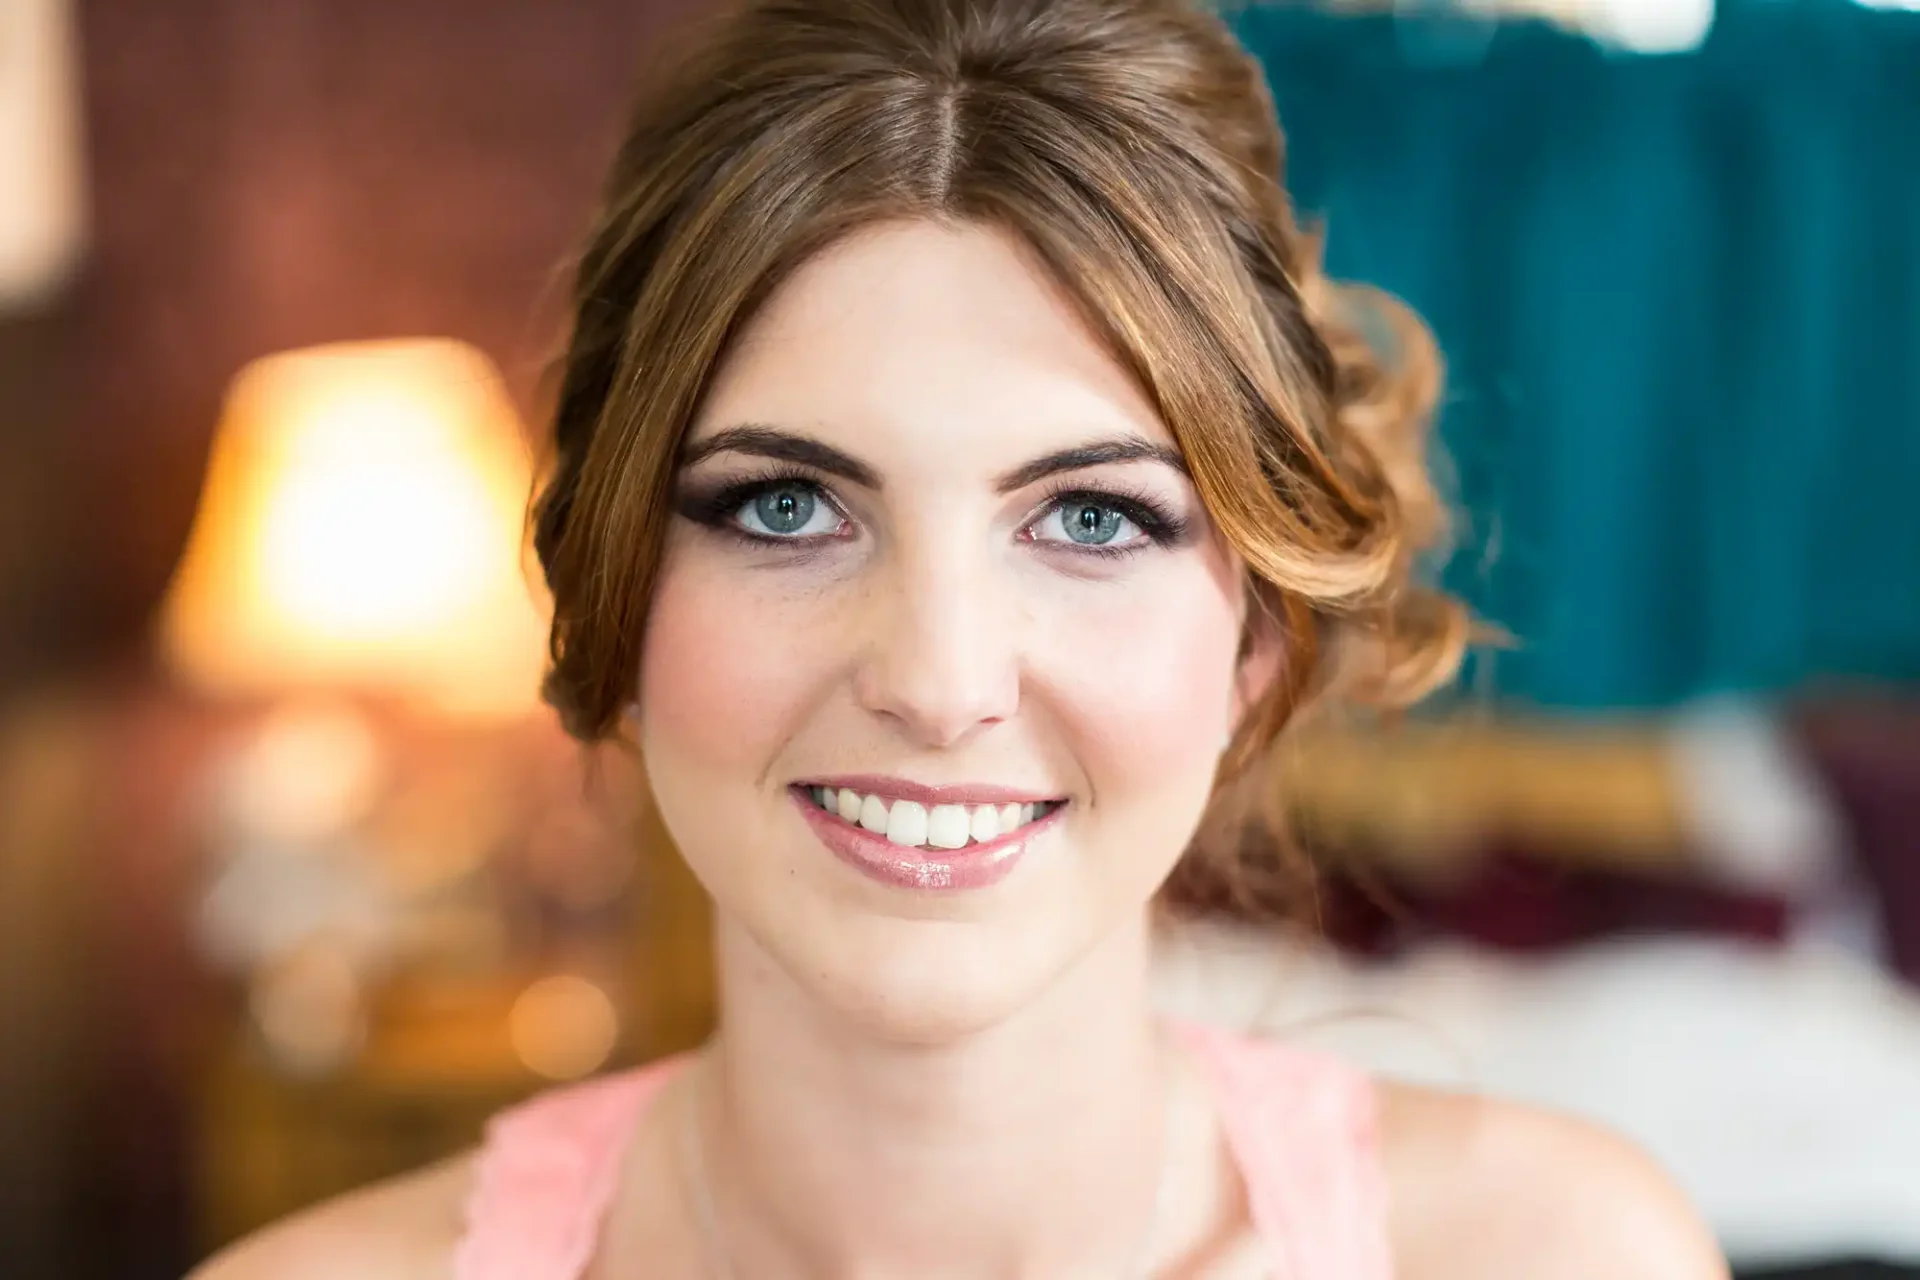 Close-up portrait of a smiling woman with blue eyes and styled brown hair, in a warmly lit room.